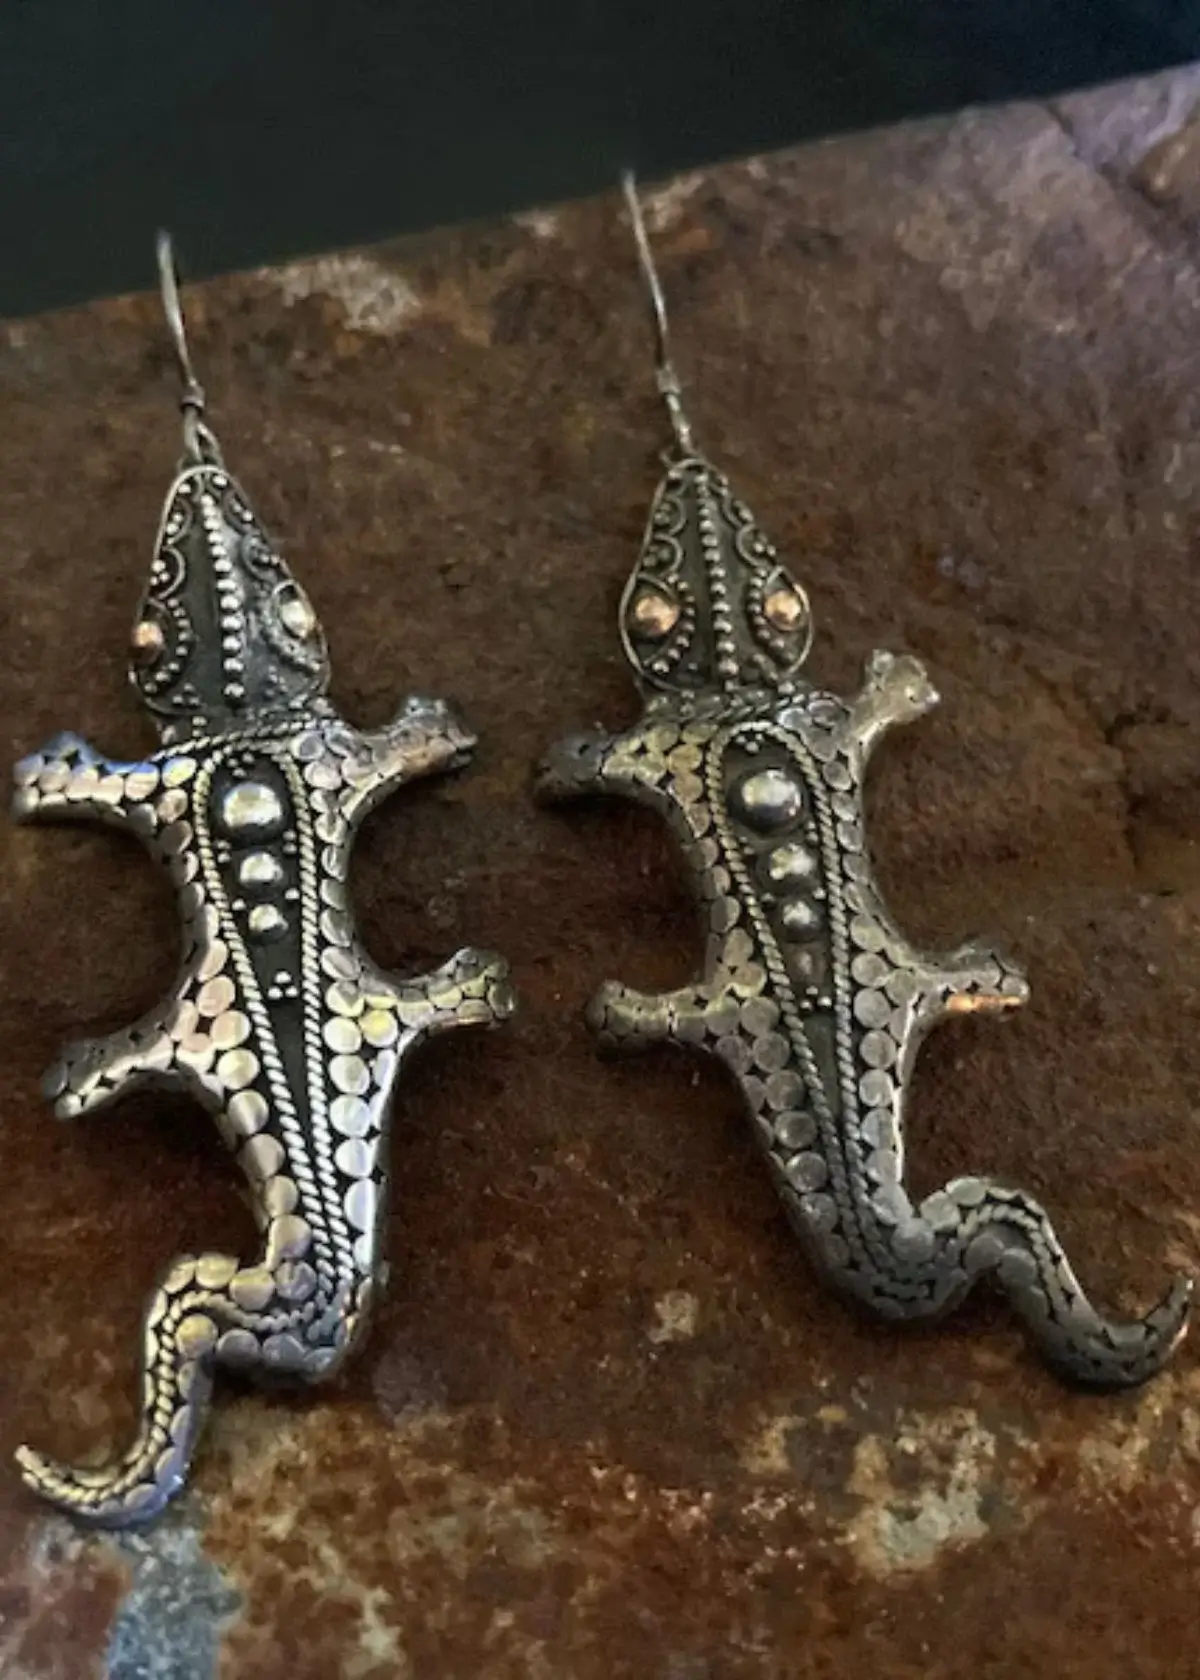 How are lizard earrings typically crafted? 